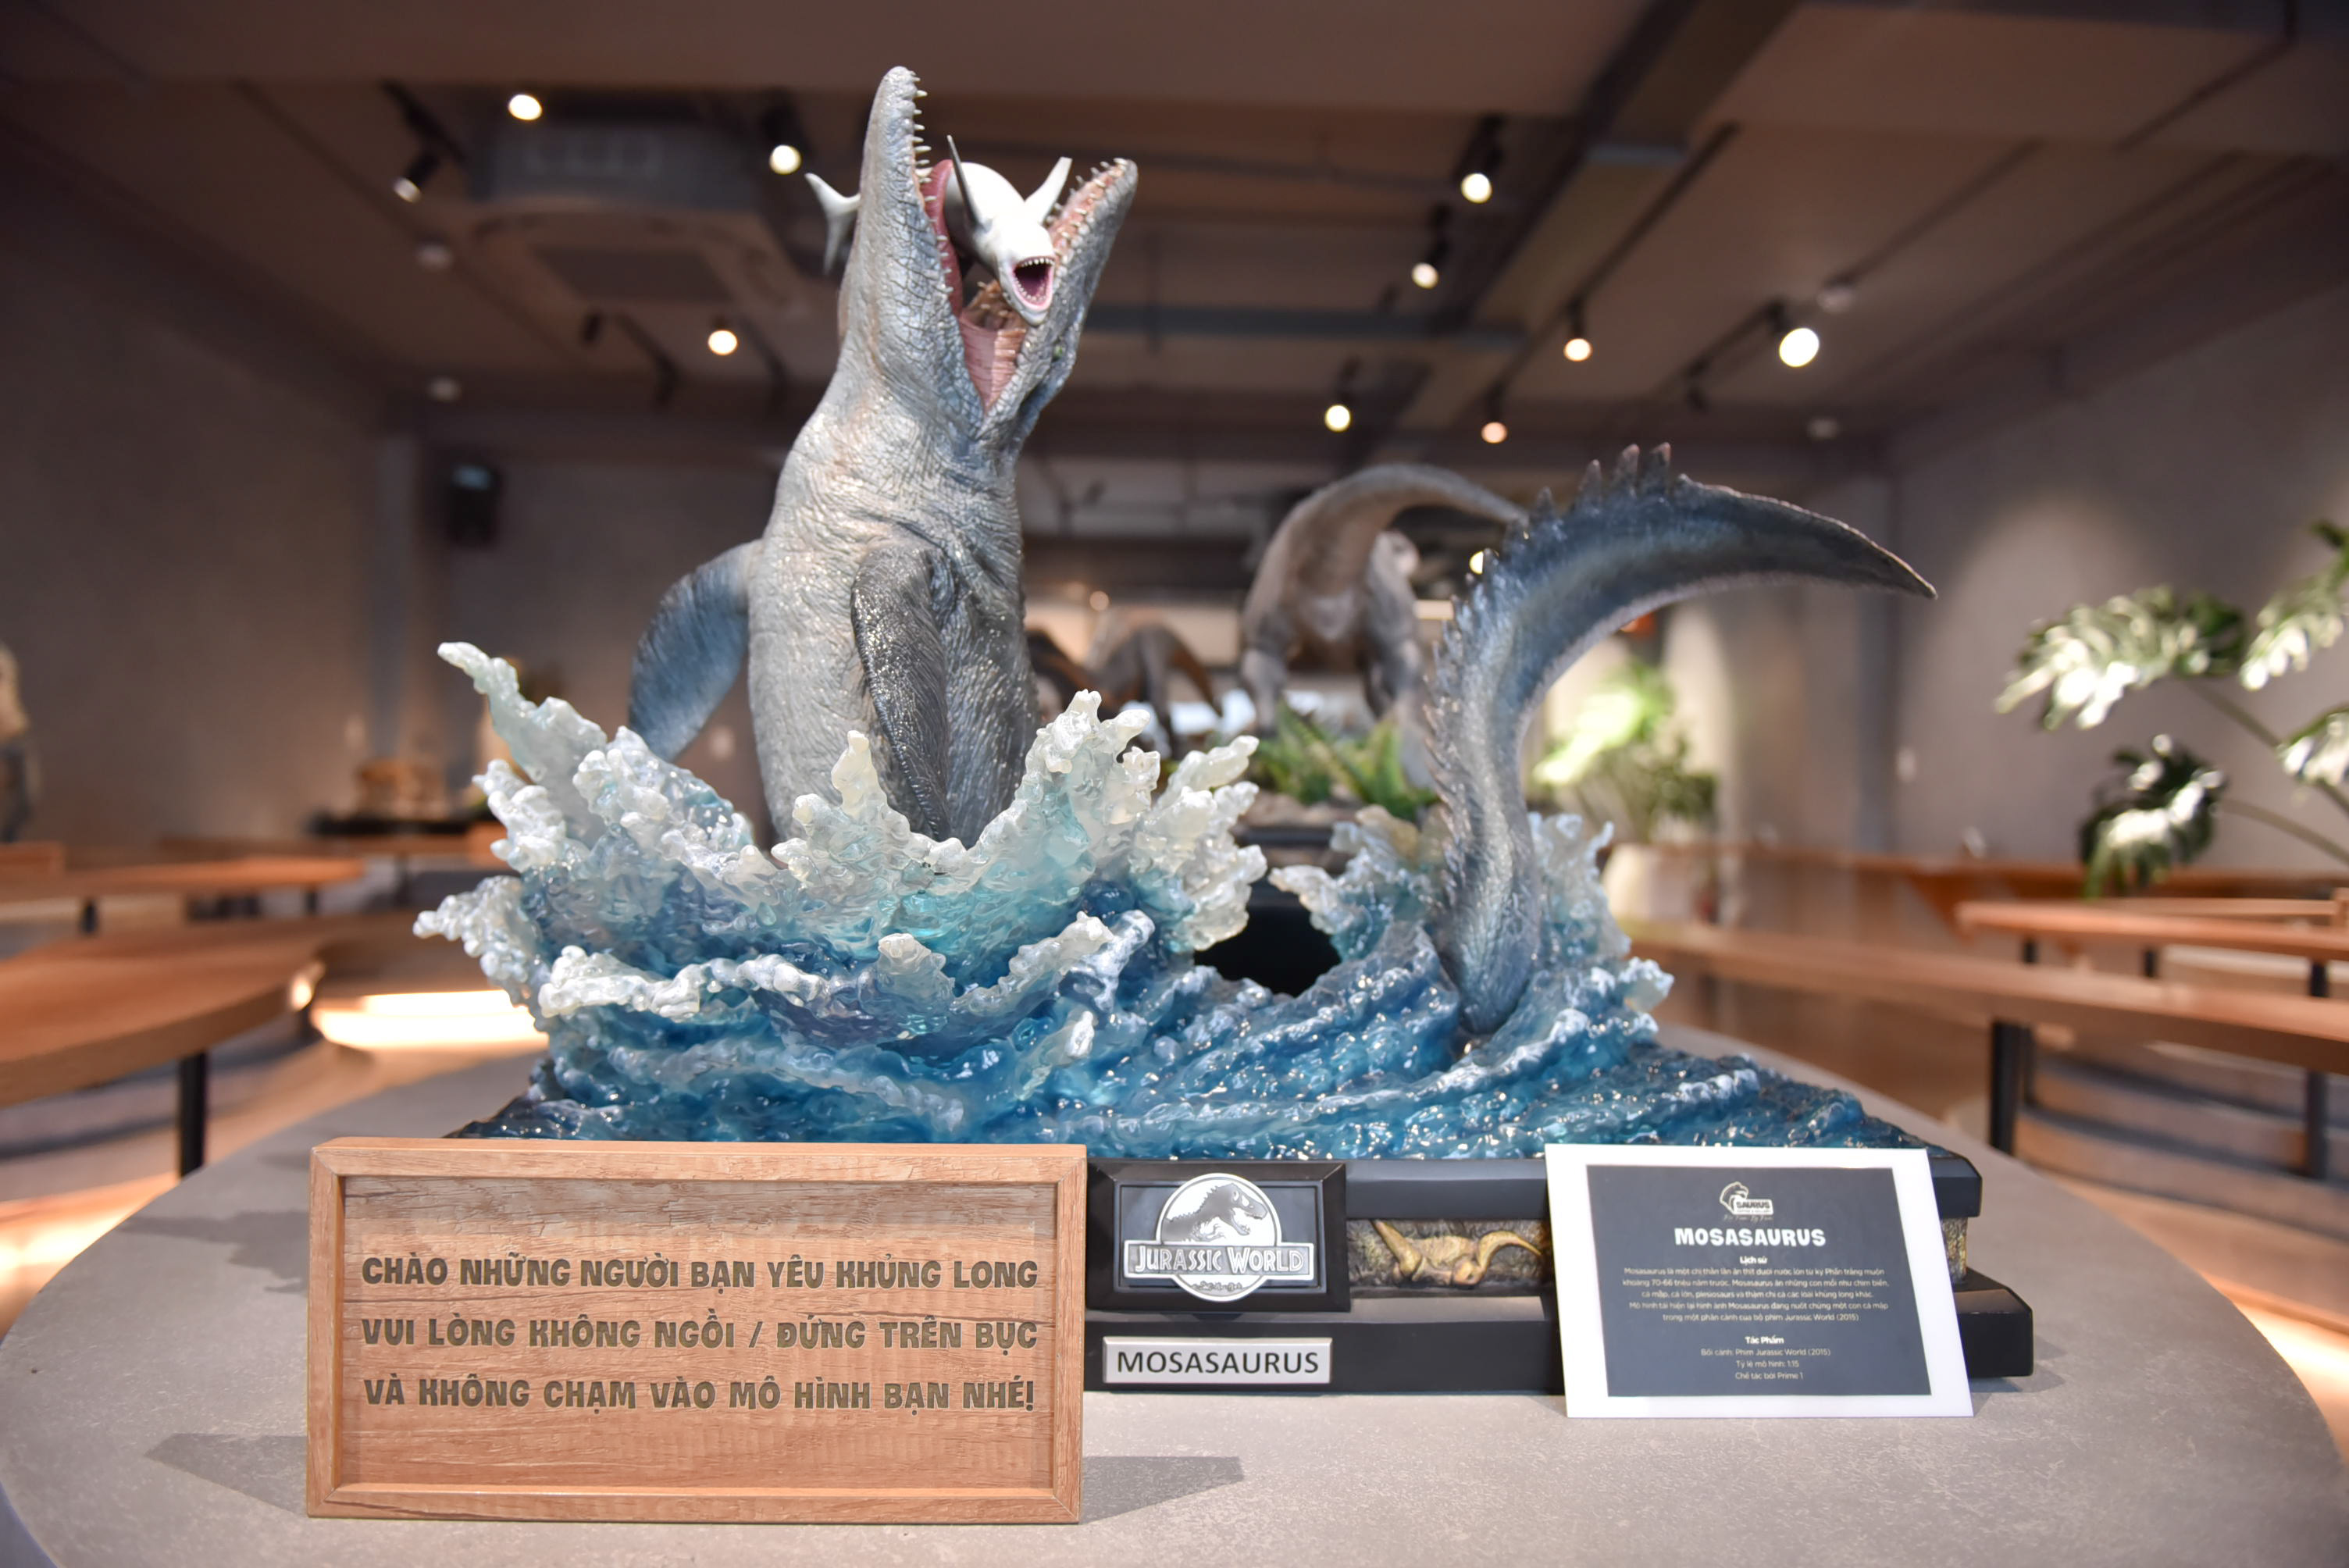 Information about a model on display at SAURUS Coffee & Gallery. Photo: Ngoc Phuong / Tuoi Tre News